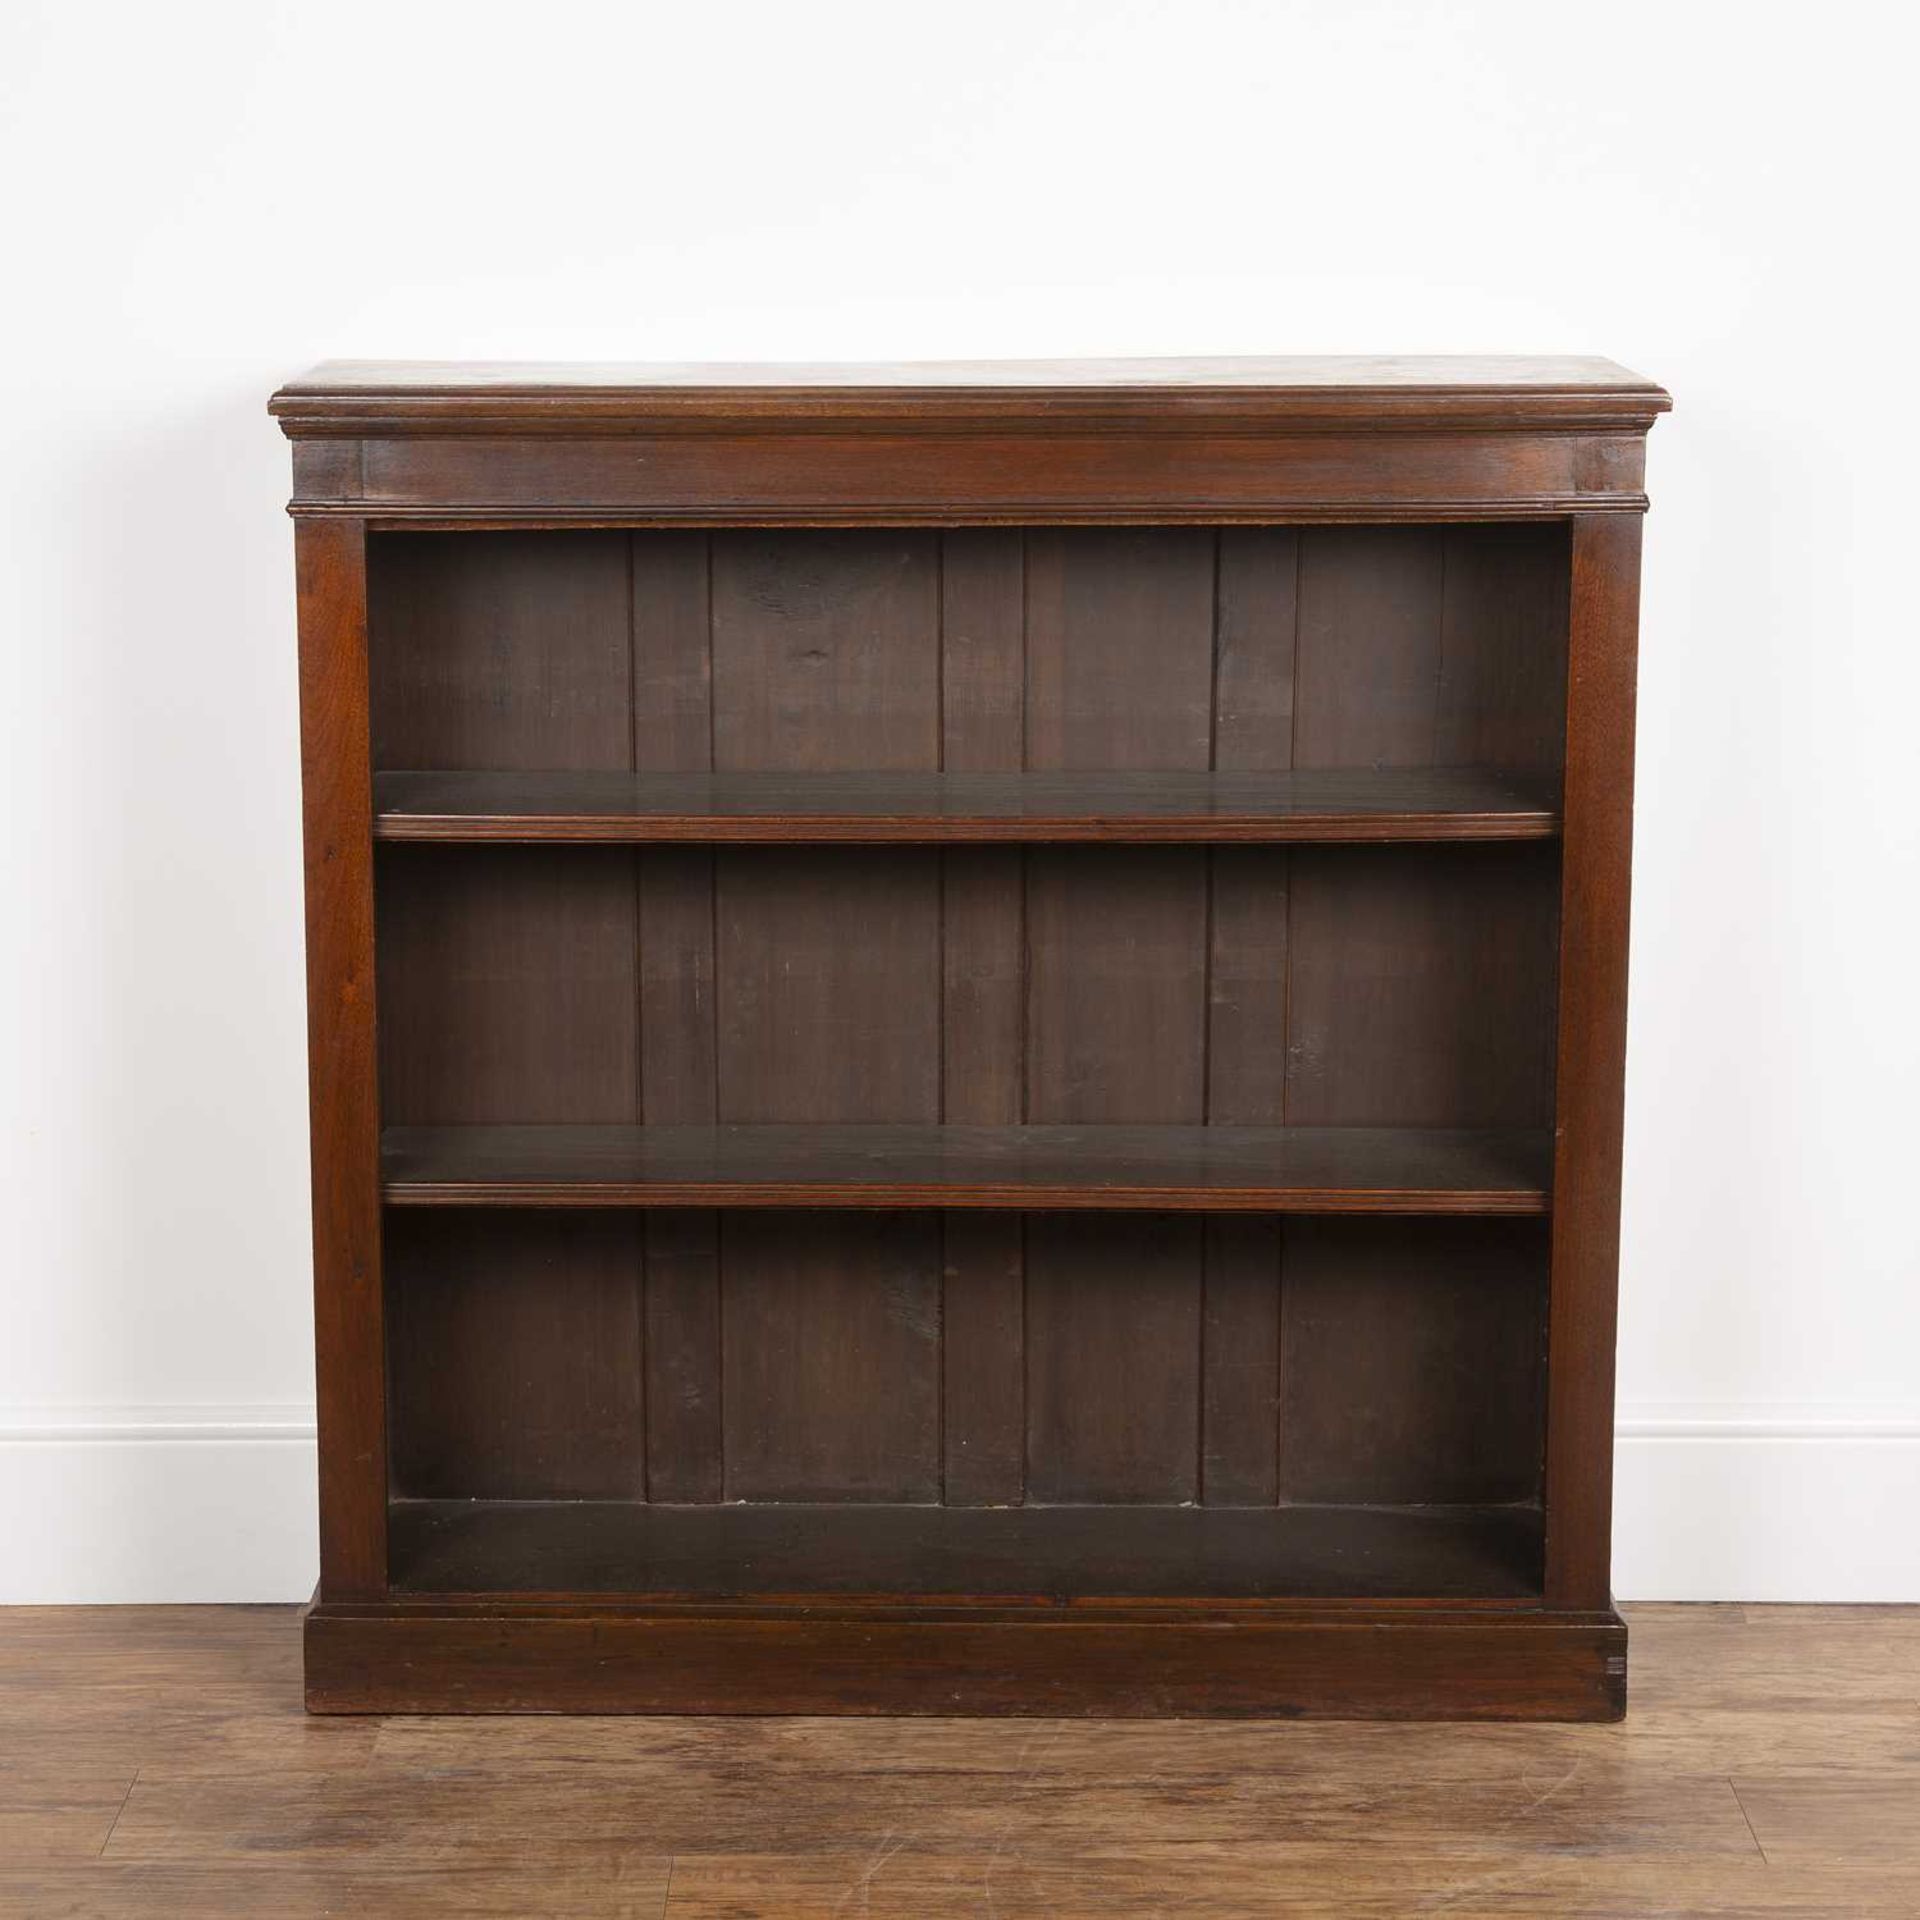 Mahogany open front bookcase circa 1900, fitted two adjustable shelves with plain plinth, 105cm wide